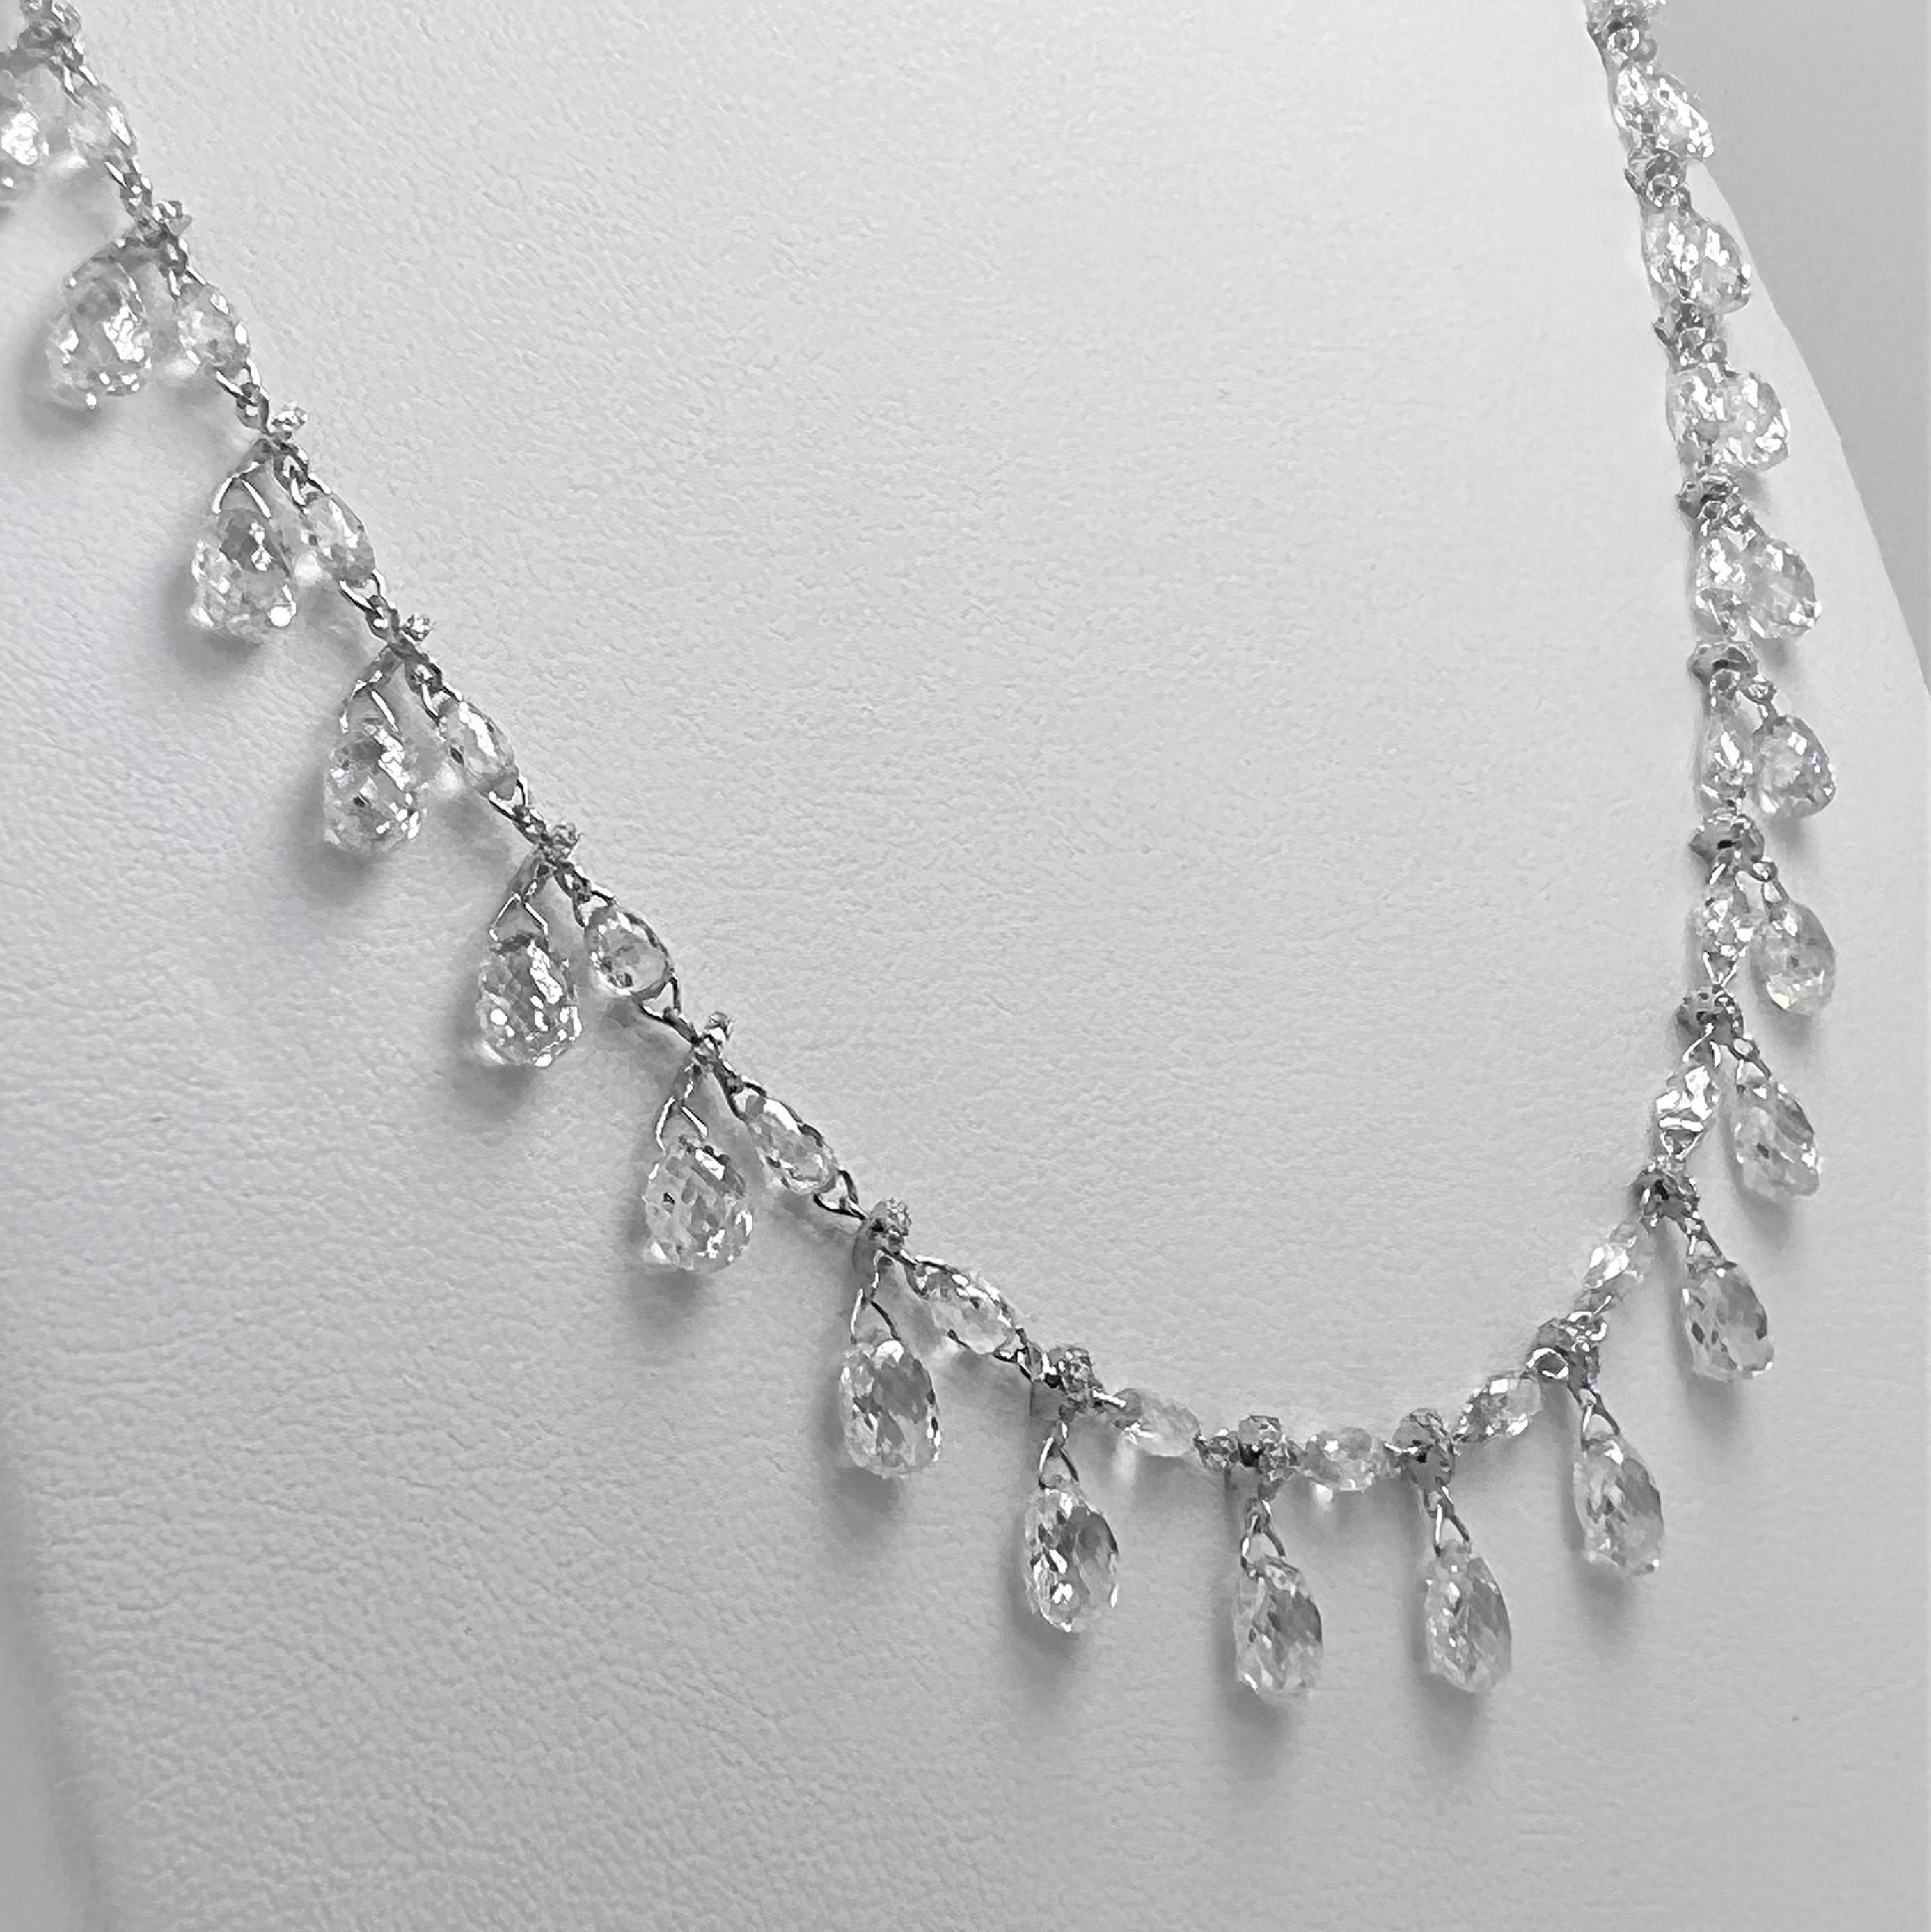 This is a stunning 1920 inspired Dangling Briolette Diamond Necklace weighing 32.98 carats in total.  This remarkable piece features 517 pieces of Briolette cut and Round Brilliant cut diamonds set on 18 Karat White Gold. 

Diamond: 32.98